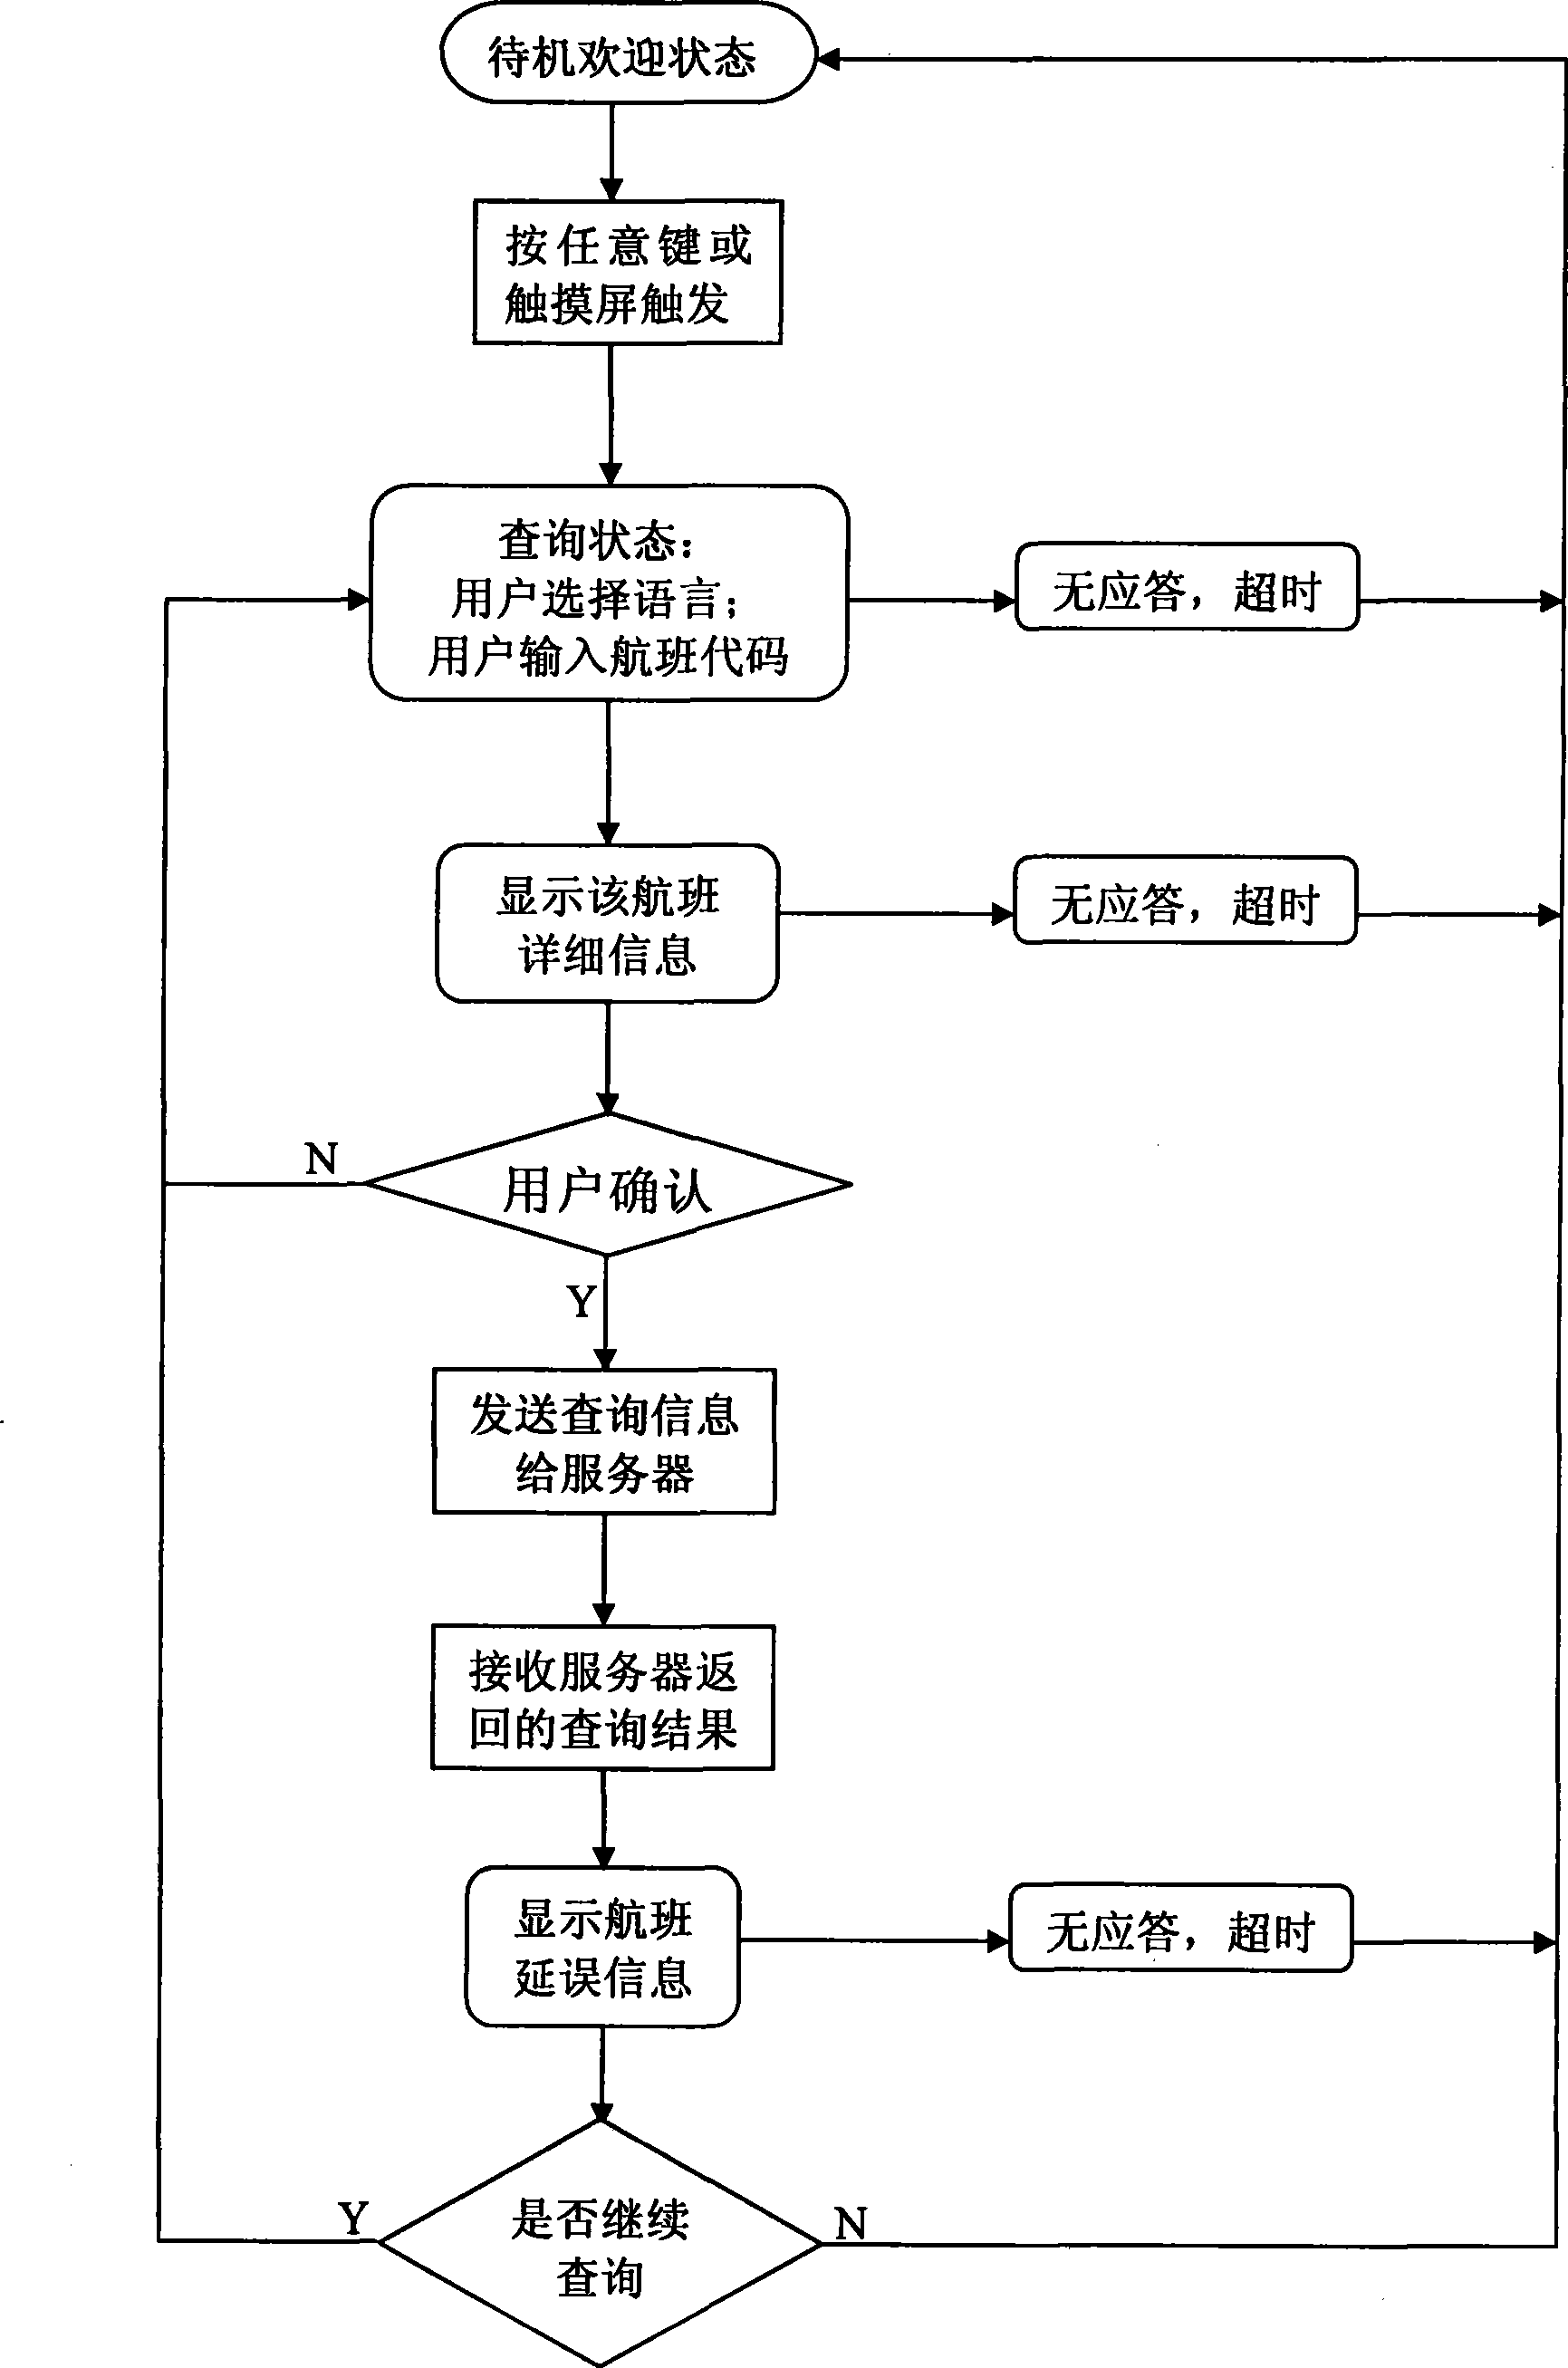 Air station flight delay information prediction query apparatus and its processing method